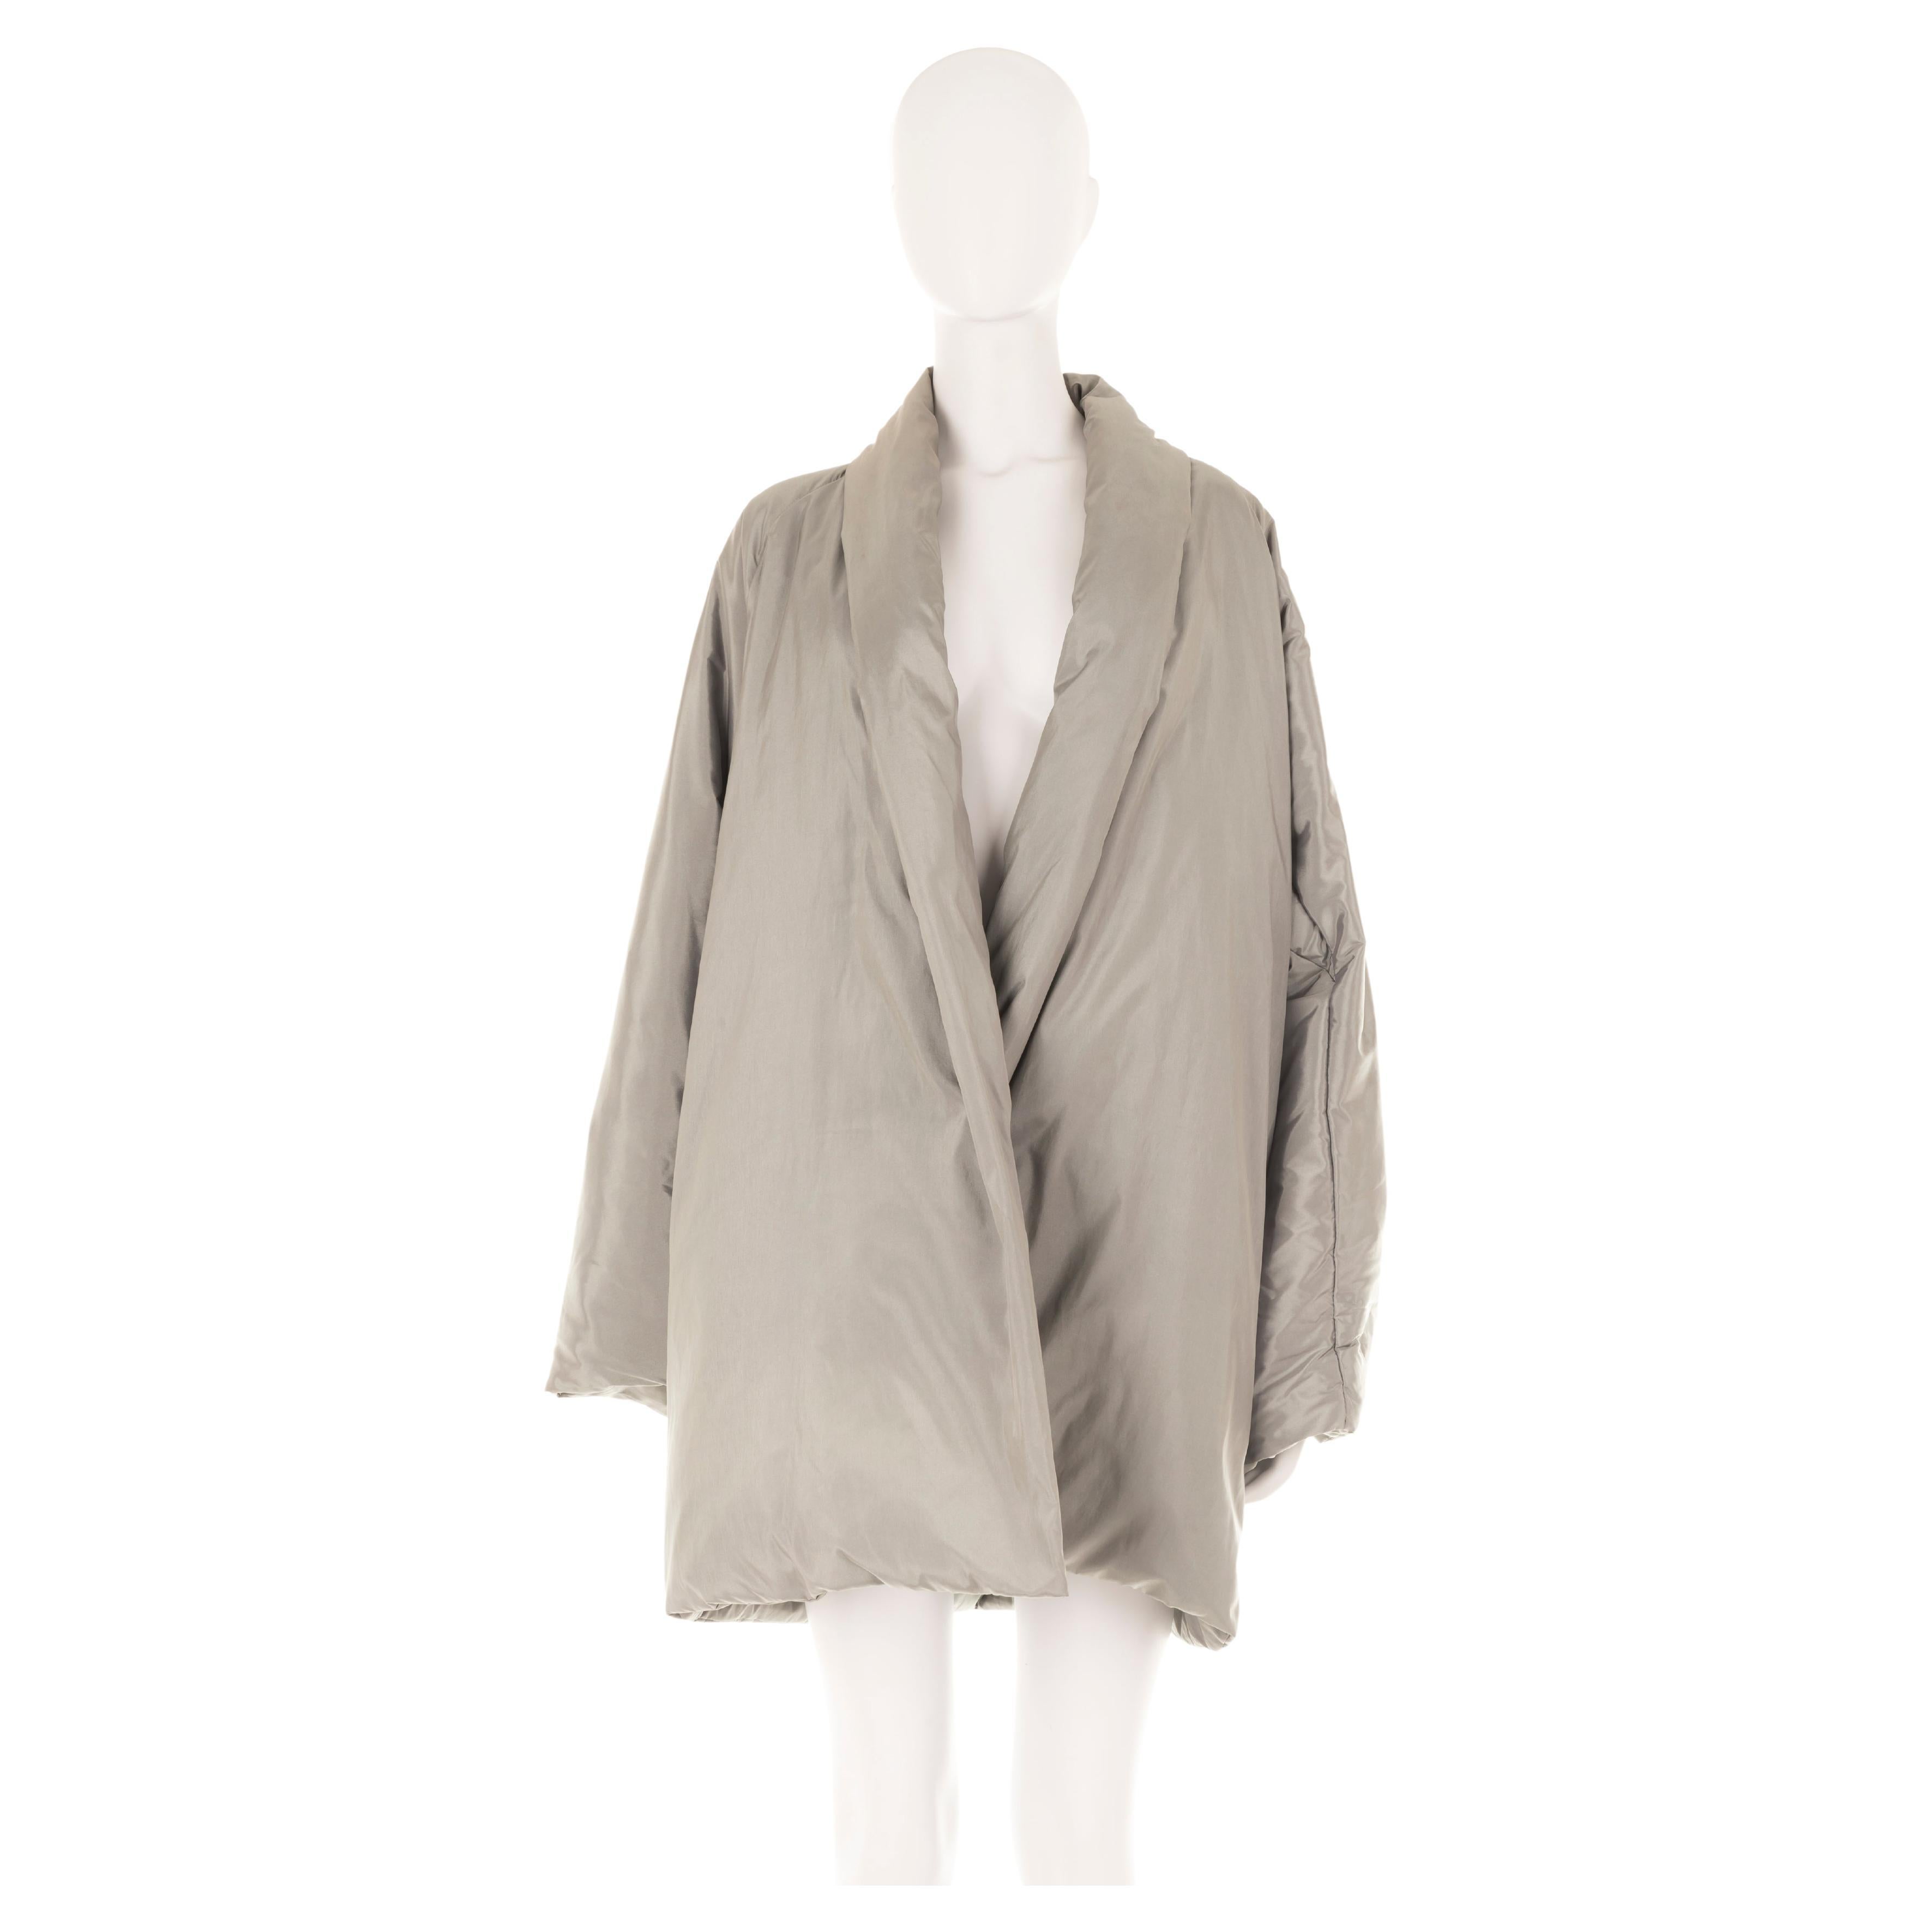 - Max Mara grey oversize coat
- Sold by Gold Palms Vintage
- Padded
- Removable padded belt